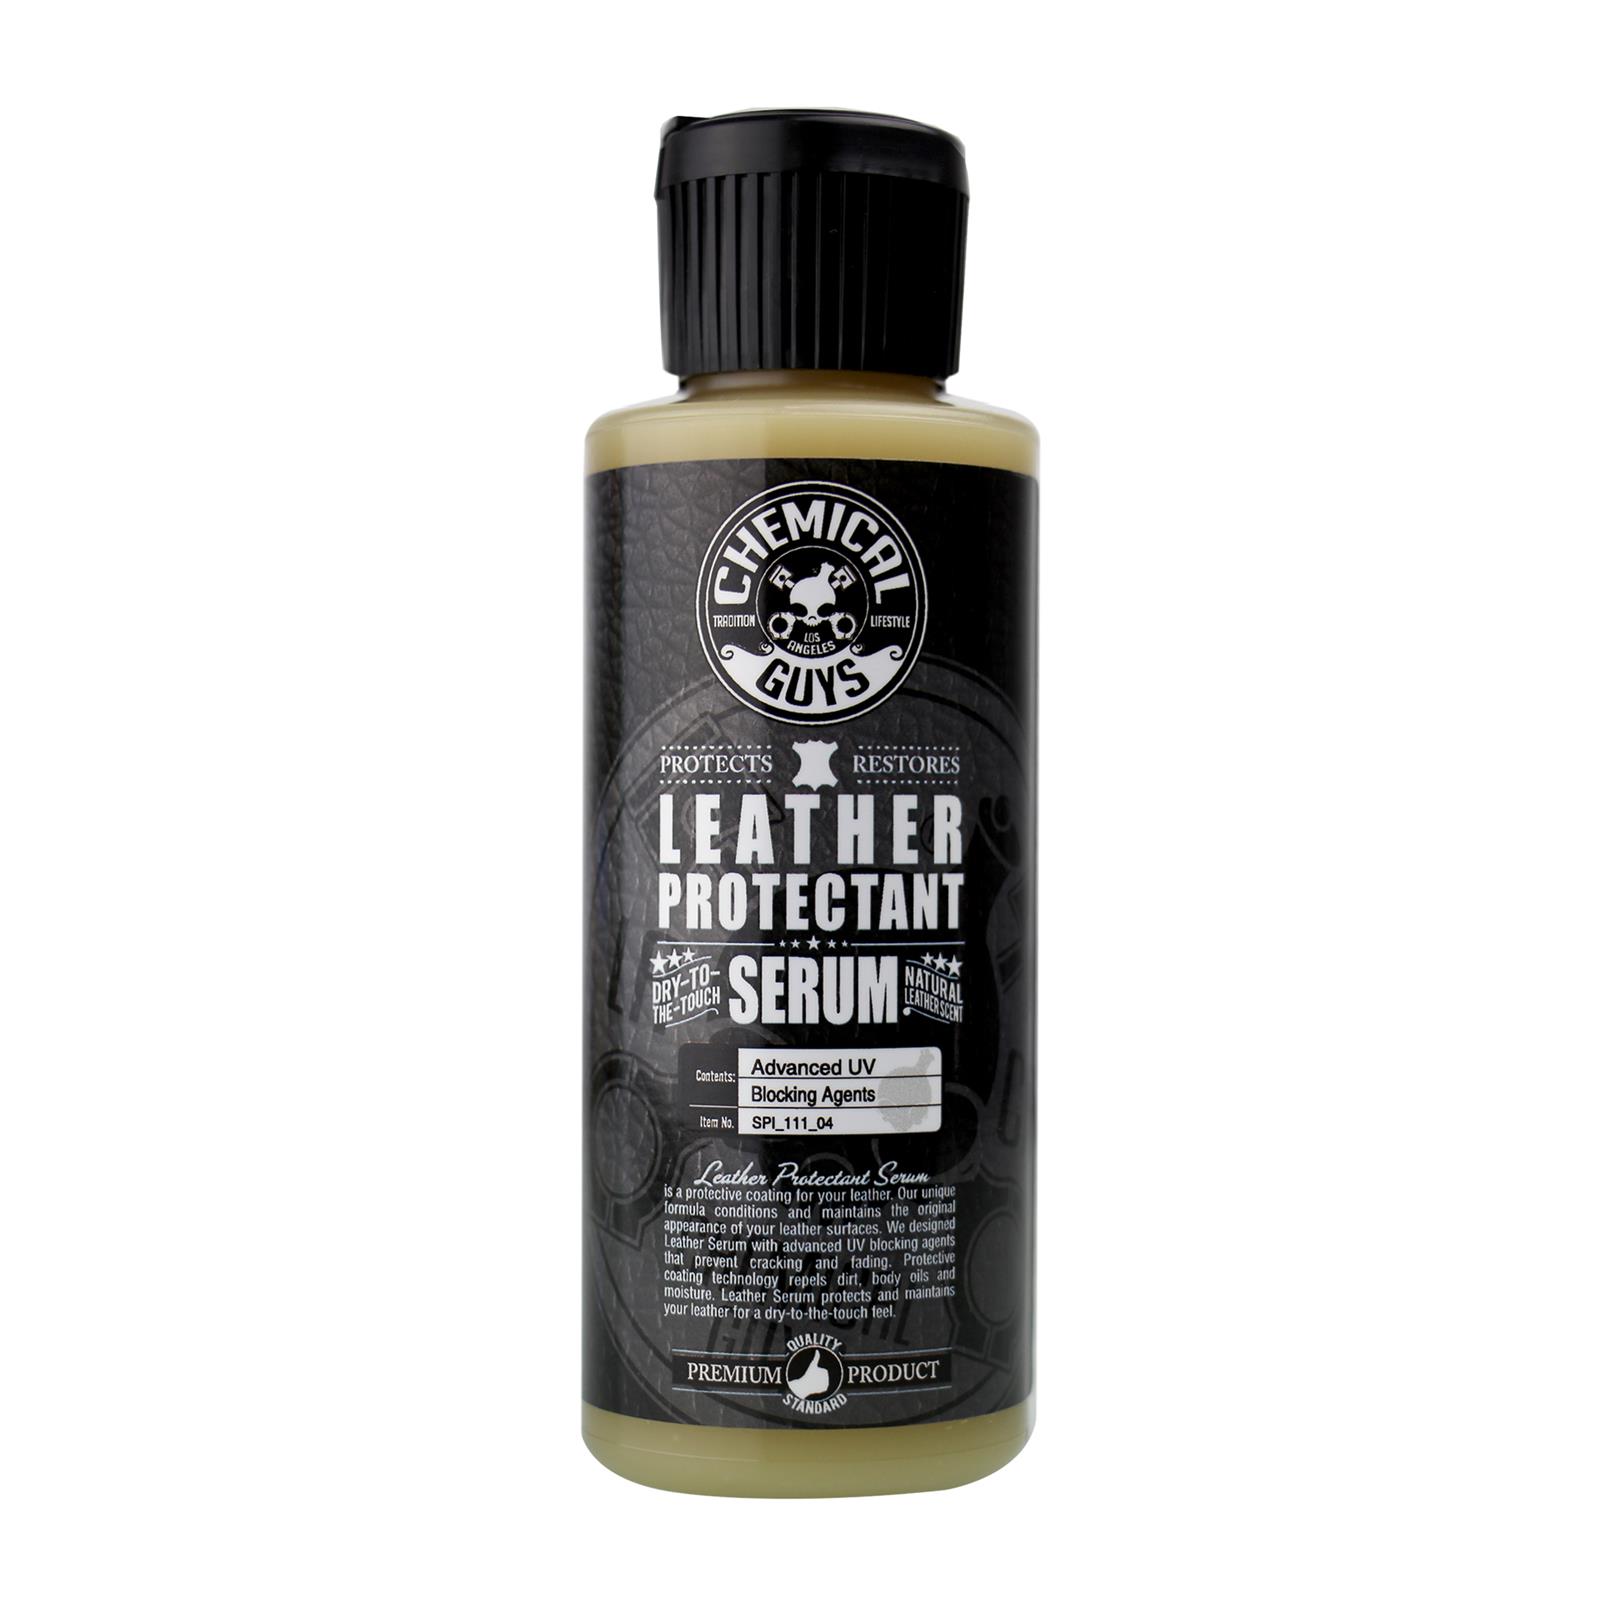 Chemical Guys SPI_111_04 Chemical Guys Leather Protectant Serum